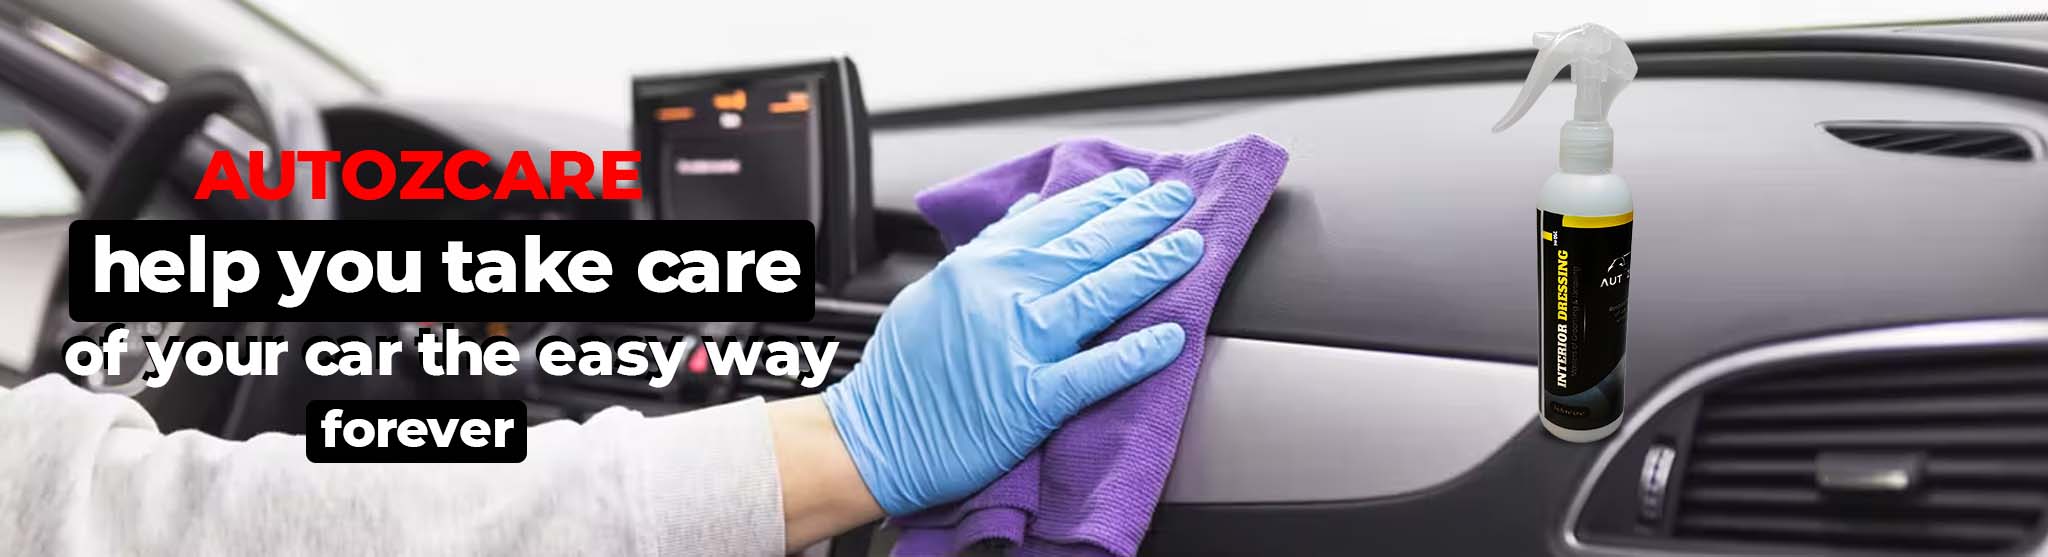 Autozcare helps you take care of your car the easy way forever!